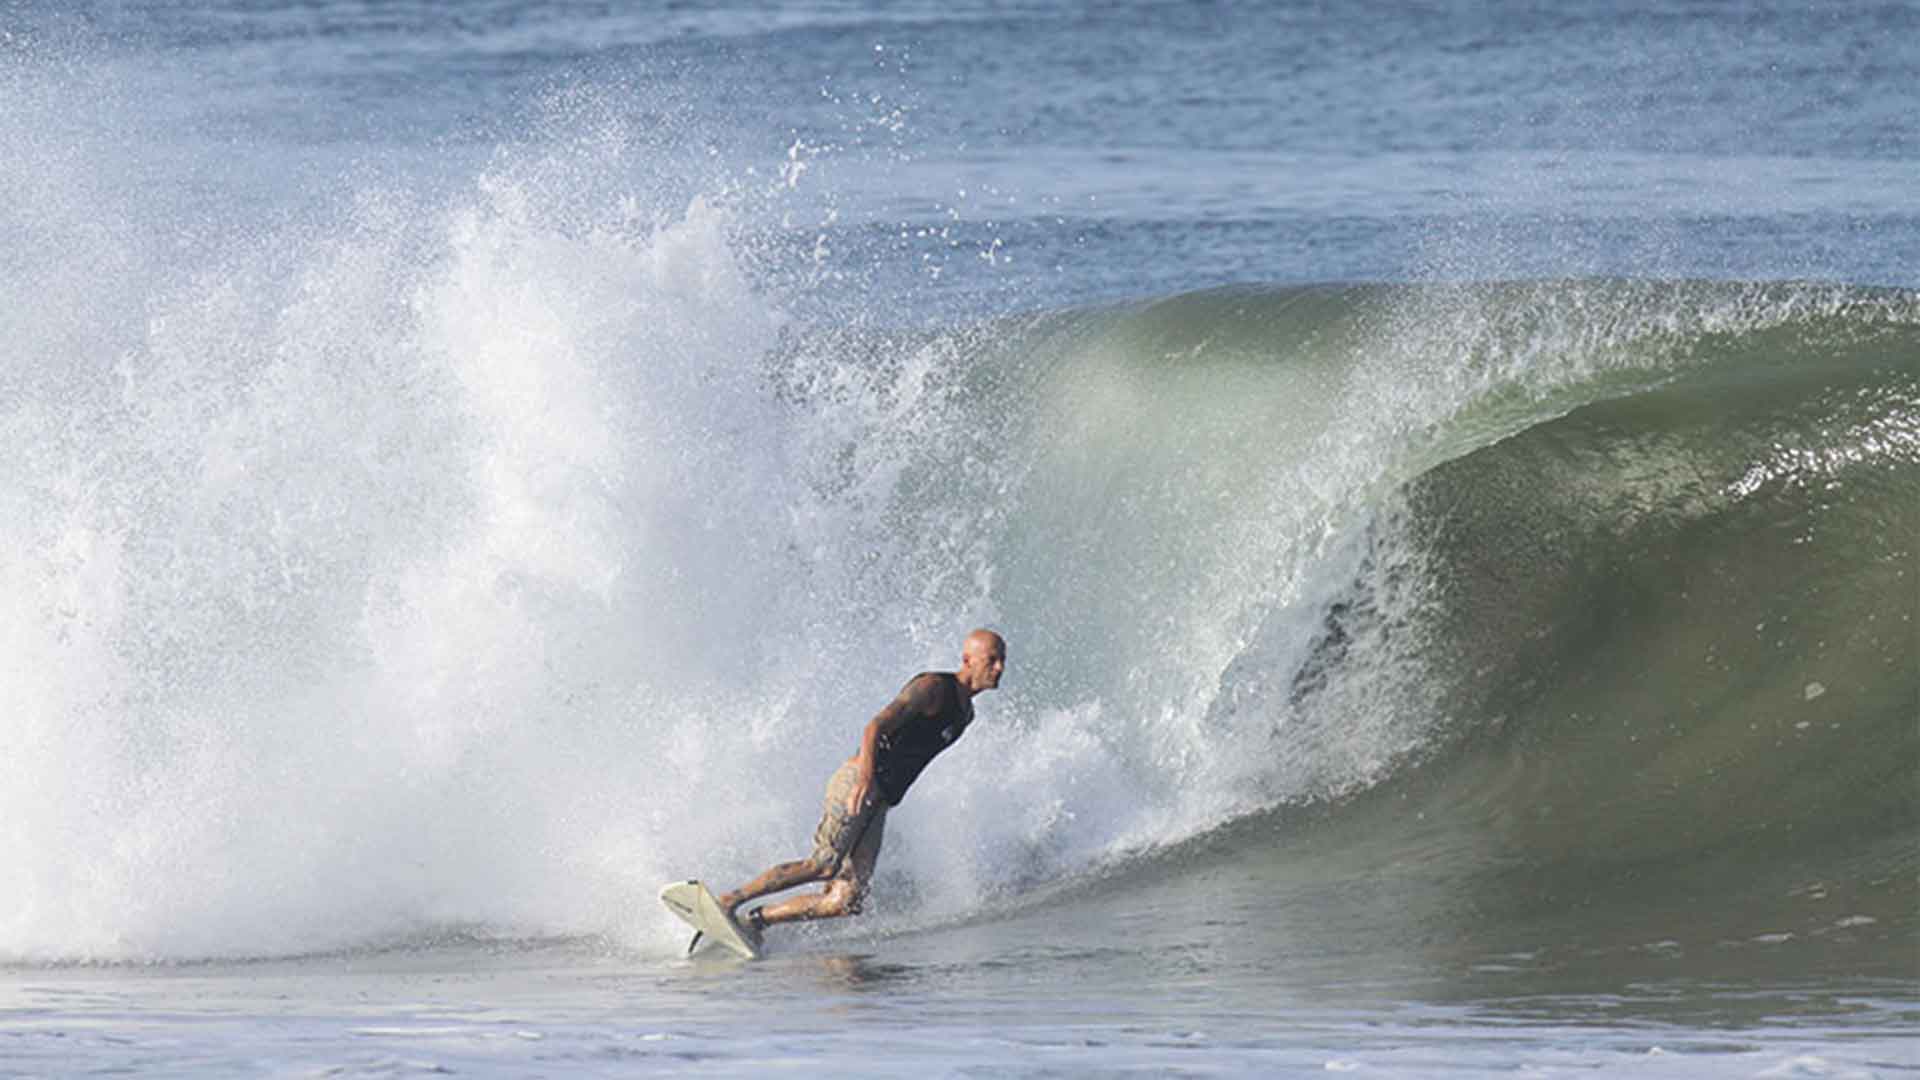 A surfer turning into a cut back on a barrel tube wave in Playa Grande, Costa Rica